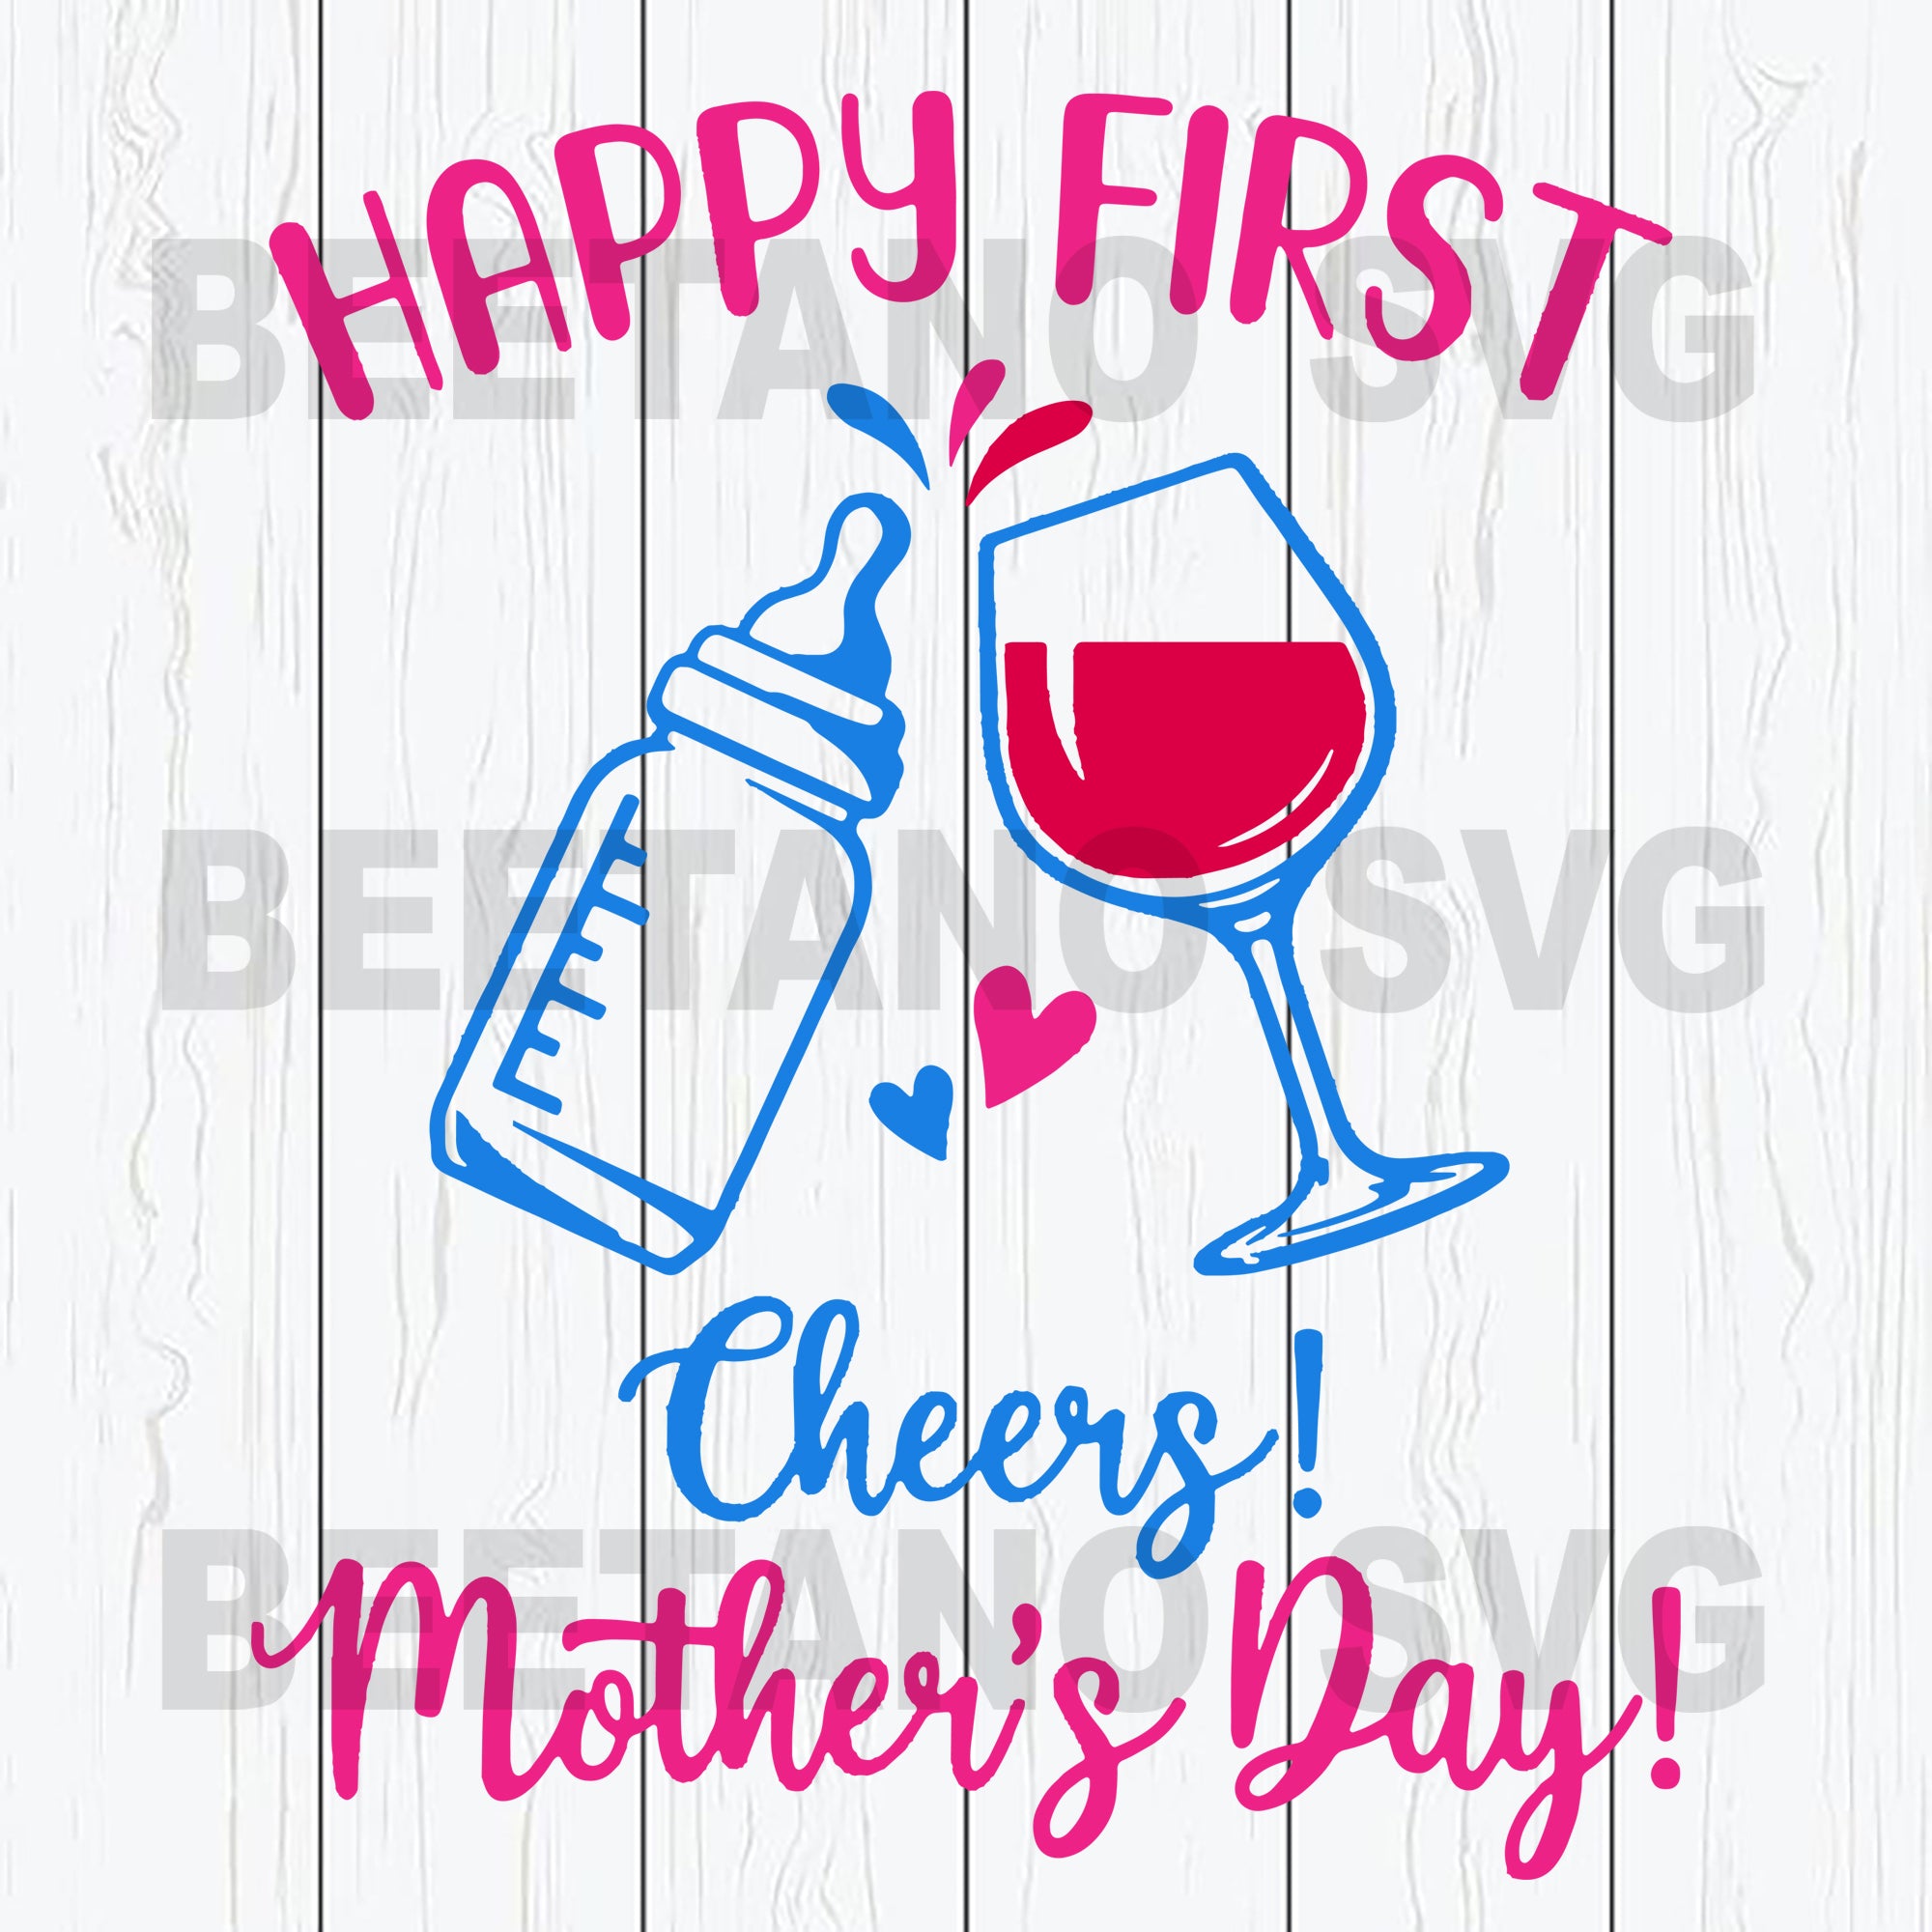 Happy First Cheers Mother's Day Svg Files, Mother's Day Svg Files